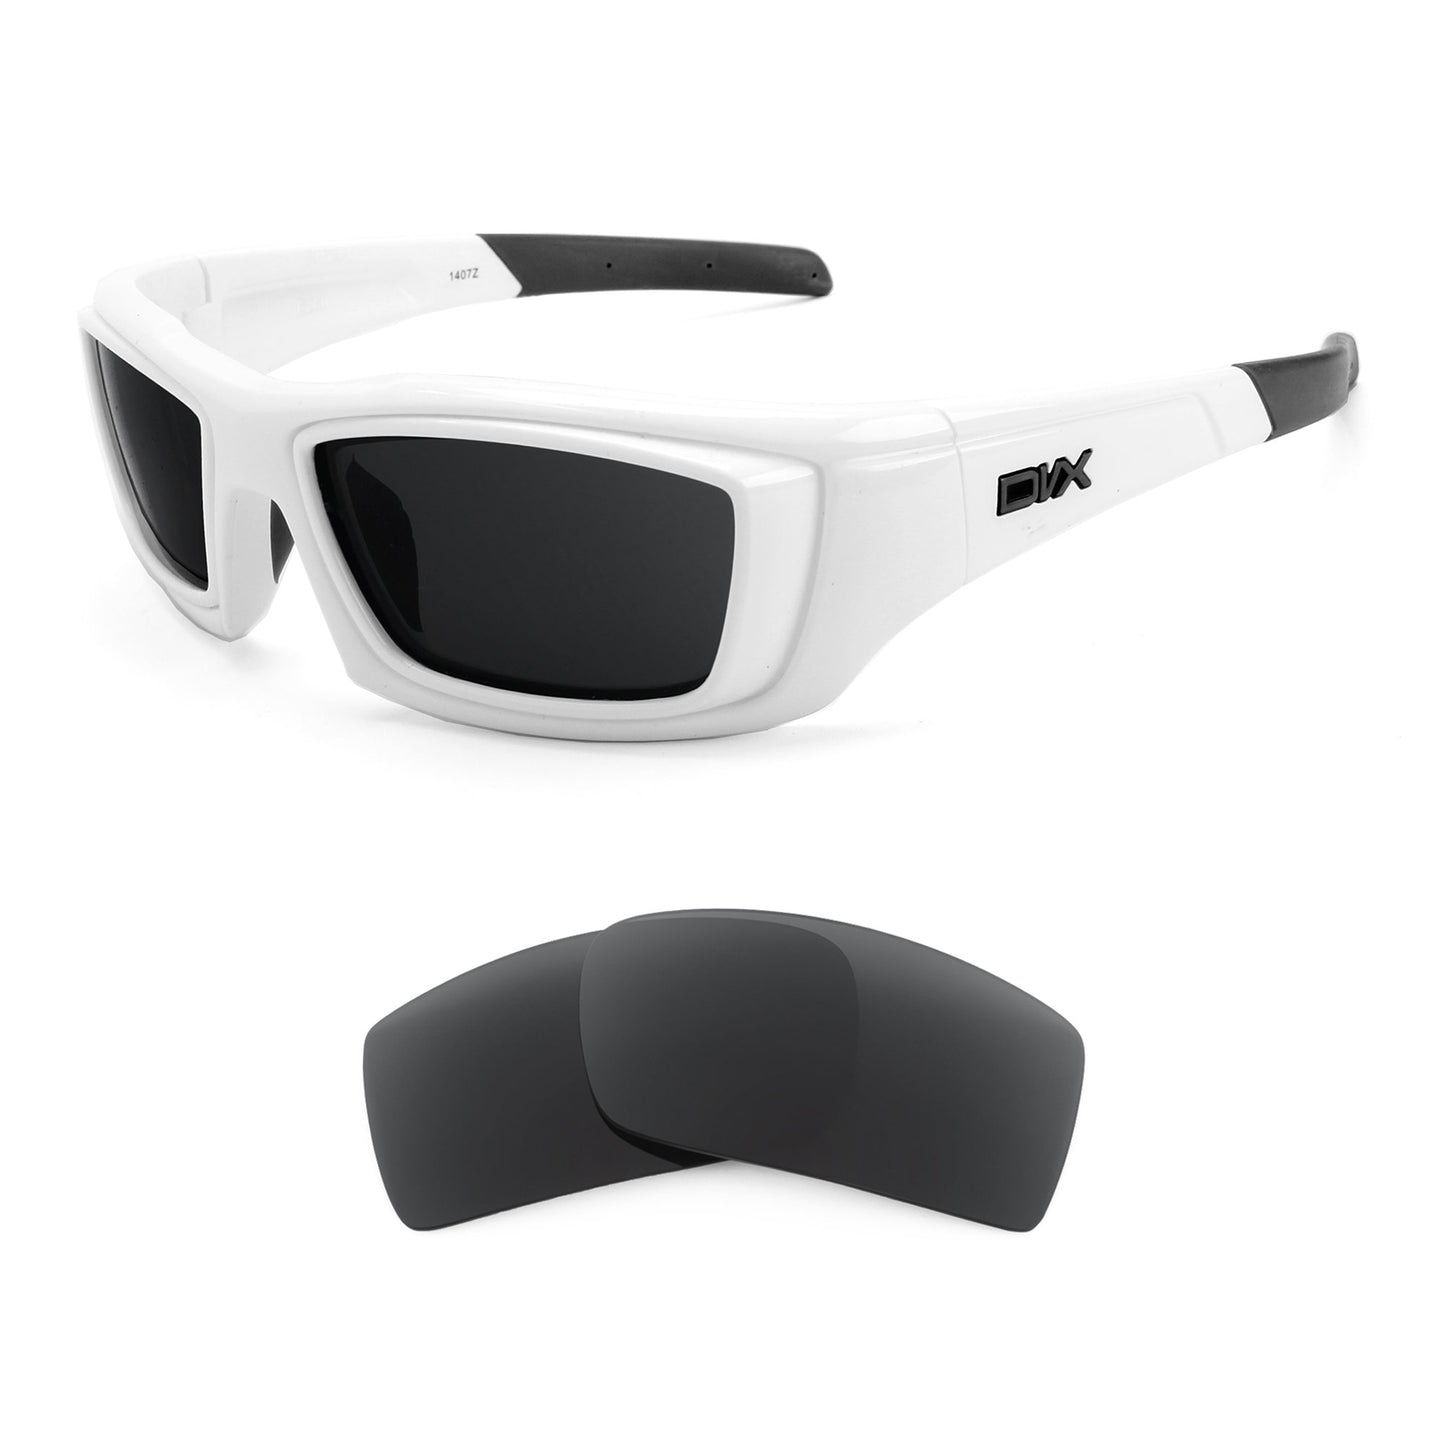 DVX Eyewear Axon sunglasses with replacement lenses